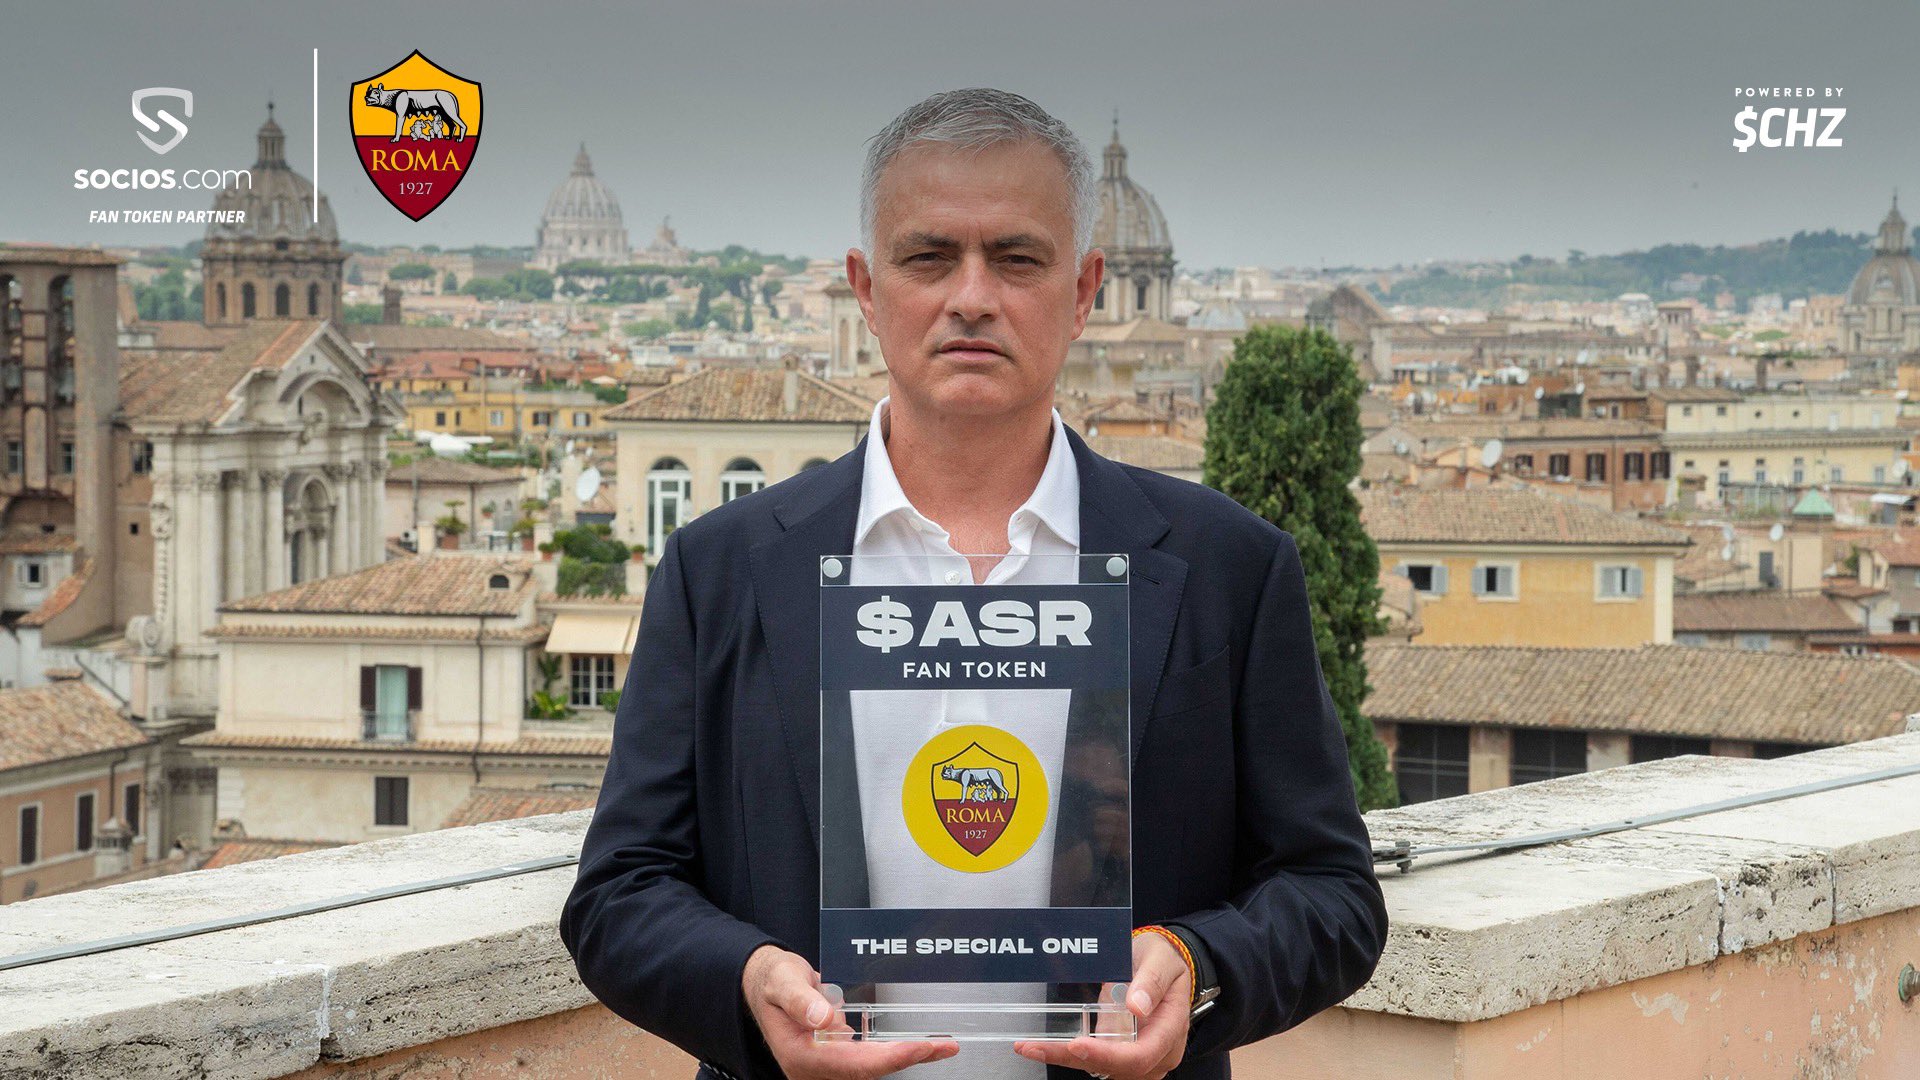 Jose Mourinho becomes the first manager to be a Fan Token